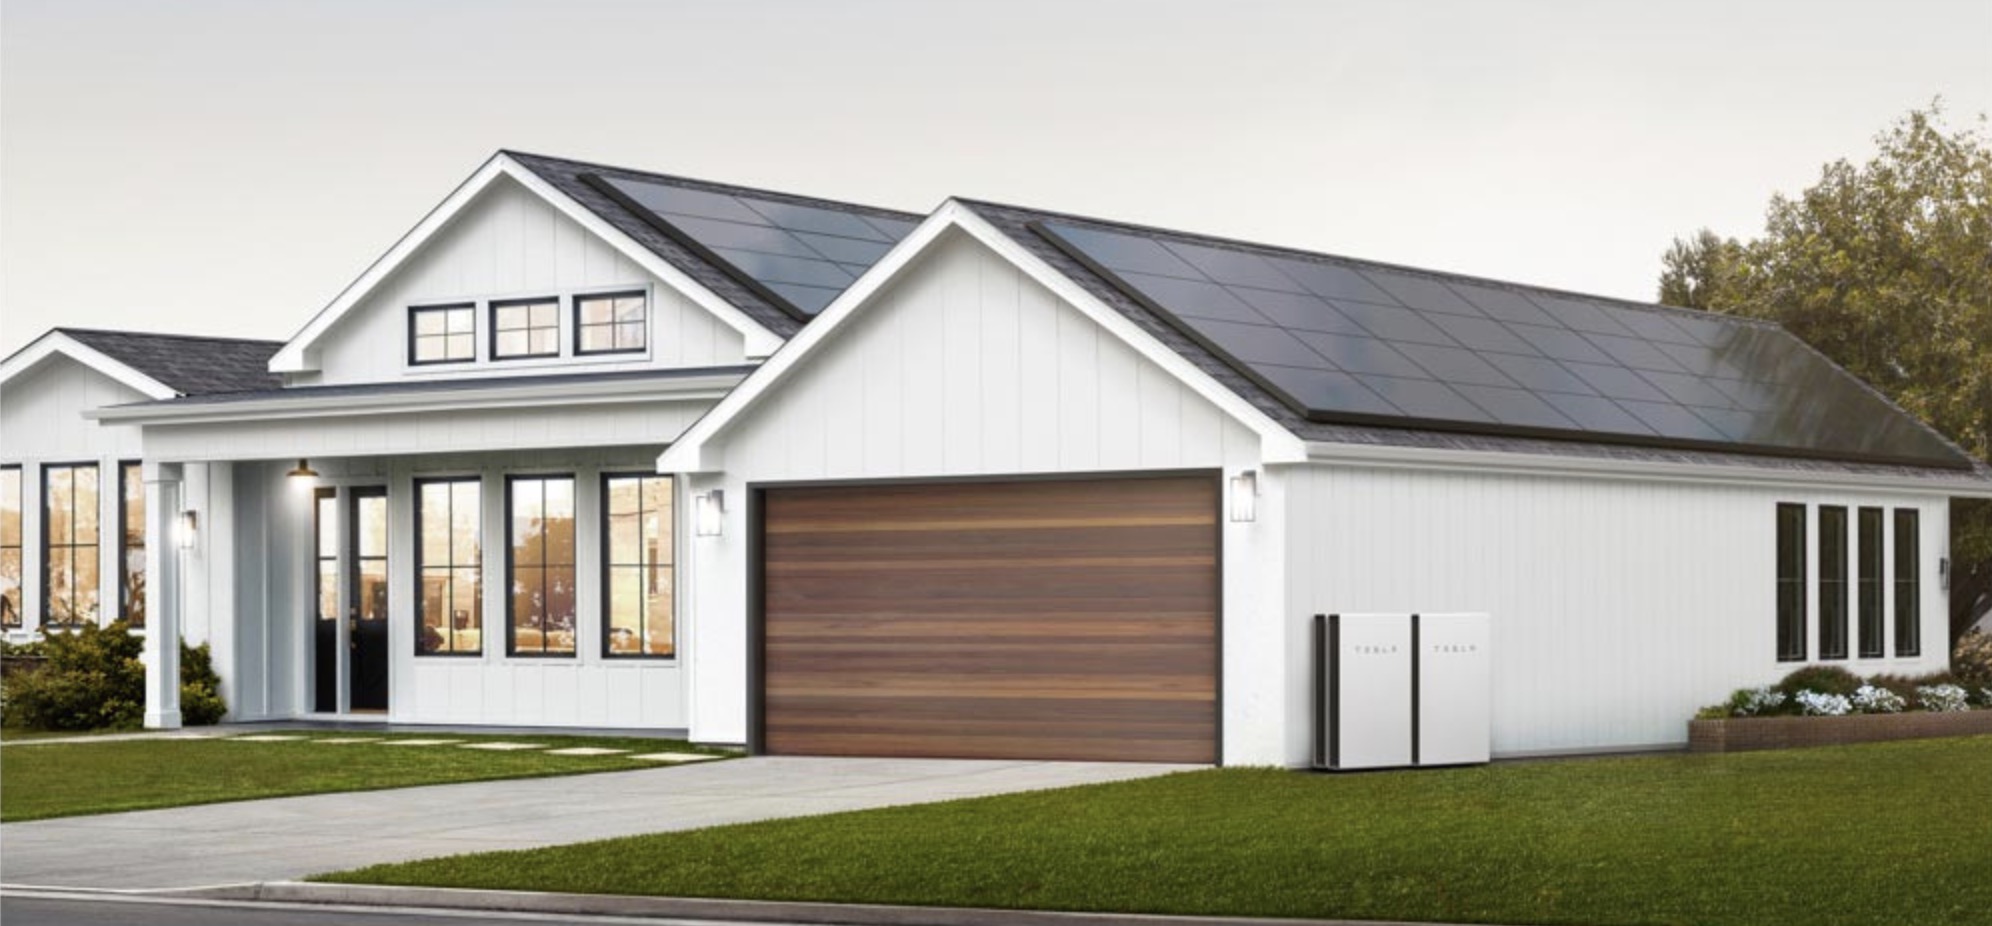 tesla-solar-now-30-less-expensive-than-industry-average-with-new